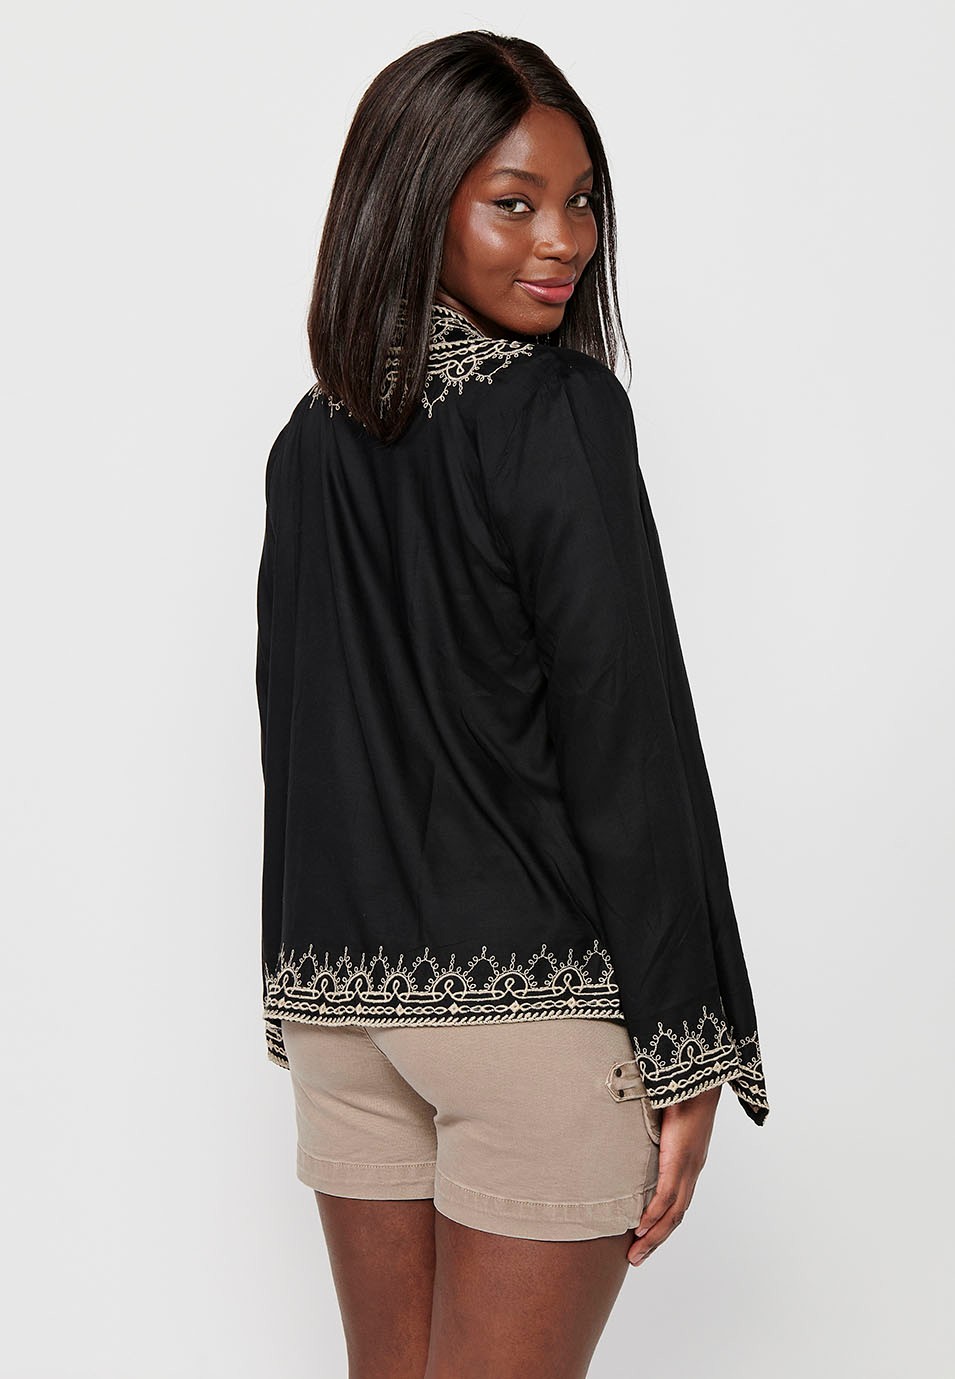 Open jacket with peak finishes and floral embroidered details in Black for Women 9